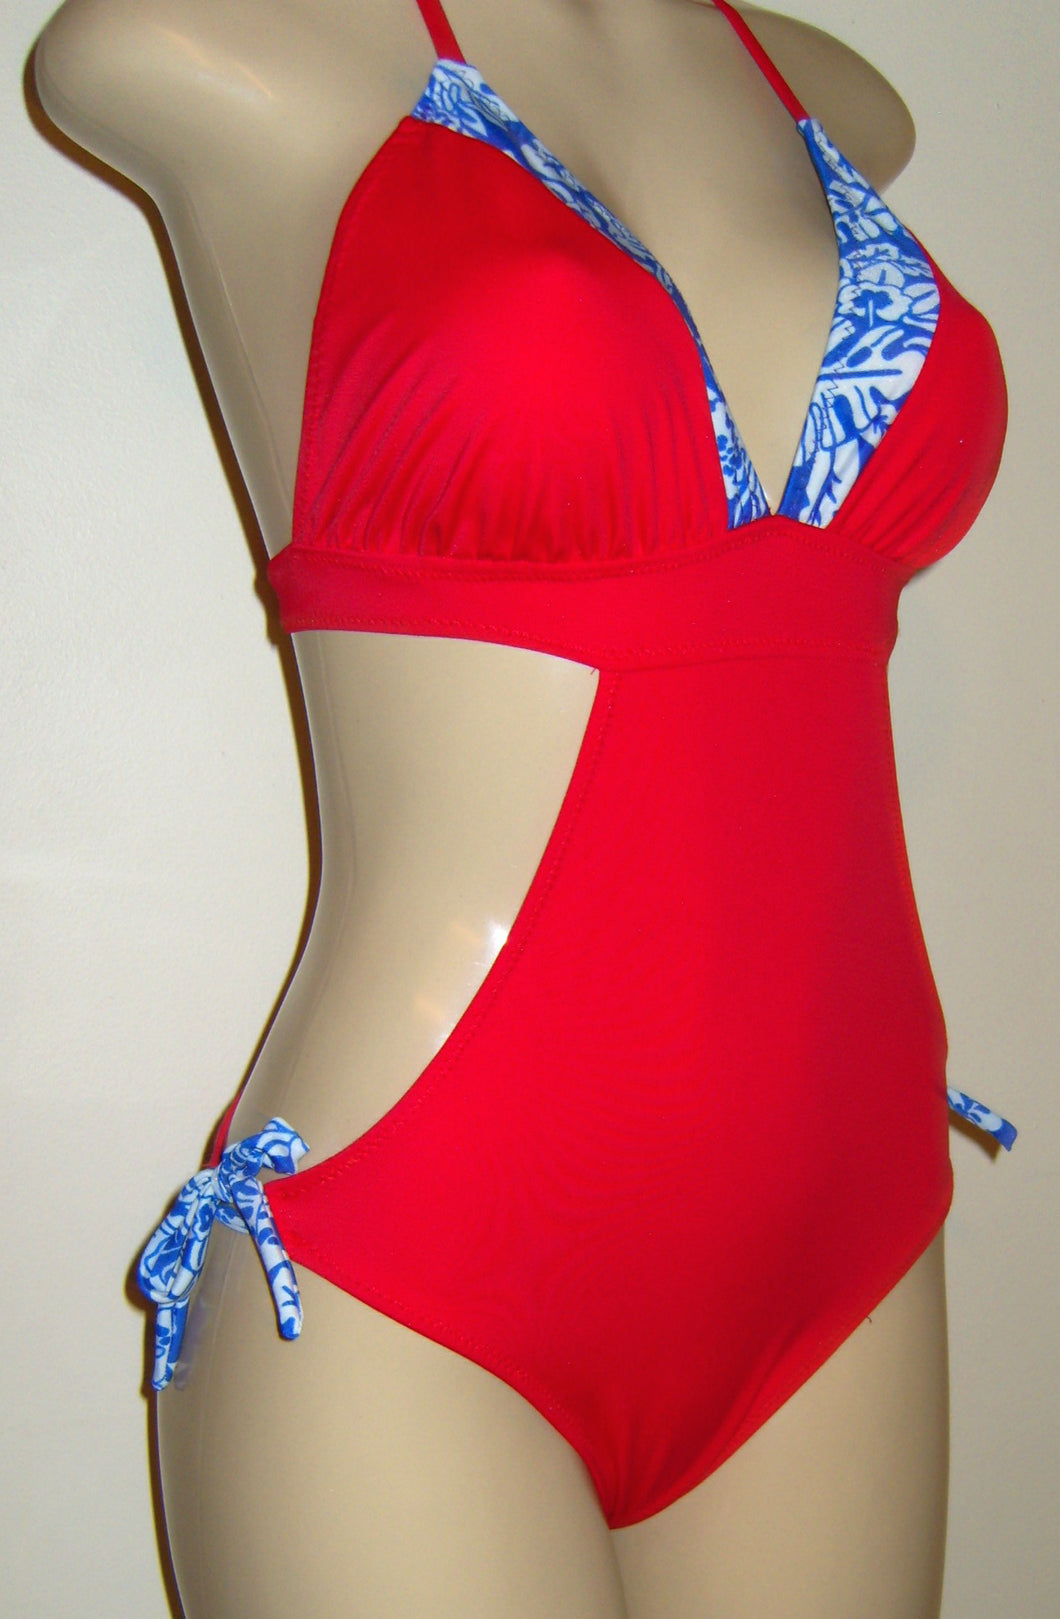 Triangle top monokini with adjustable sides and scrunched butt